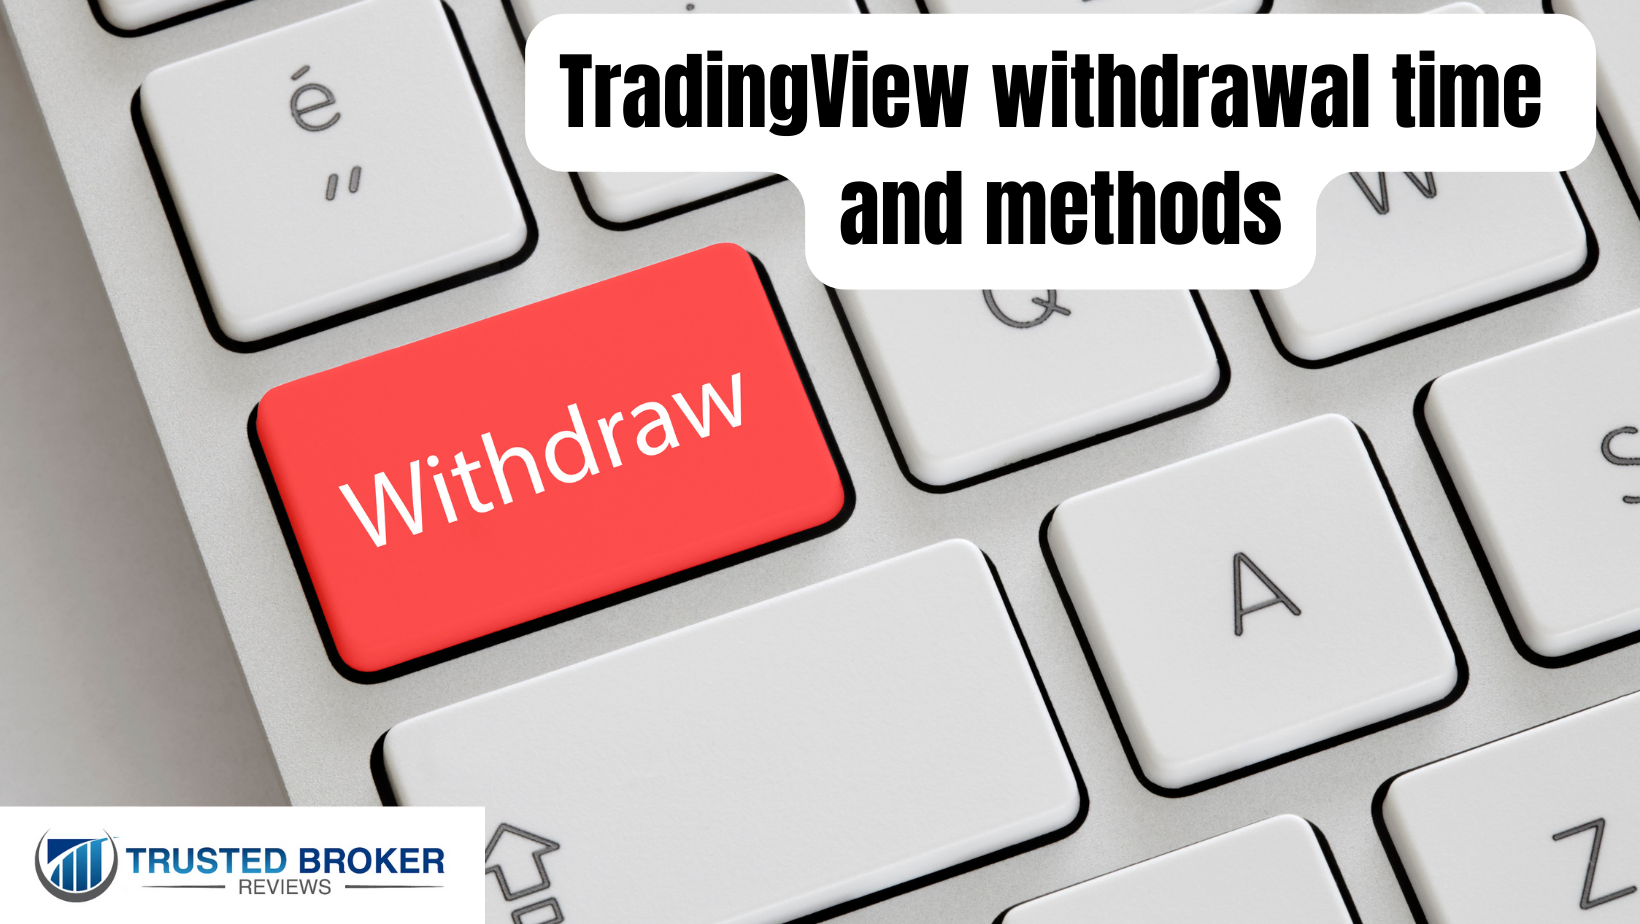 TradingView withdrawal time and methods